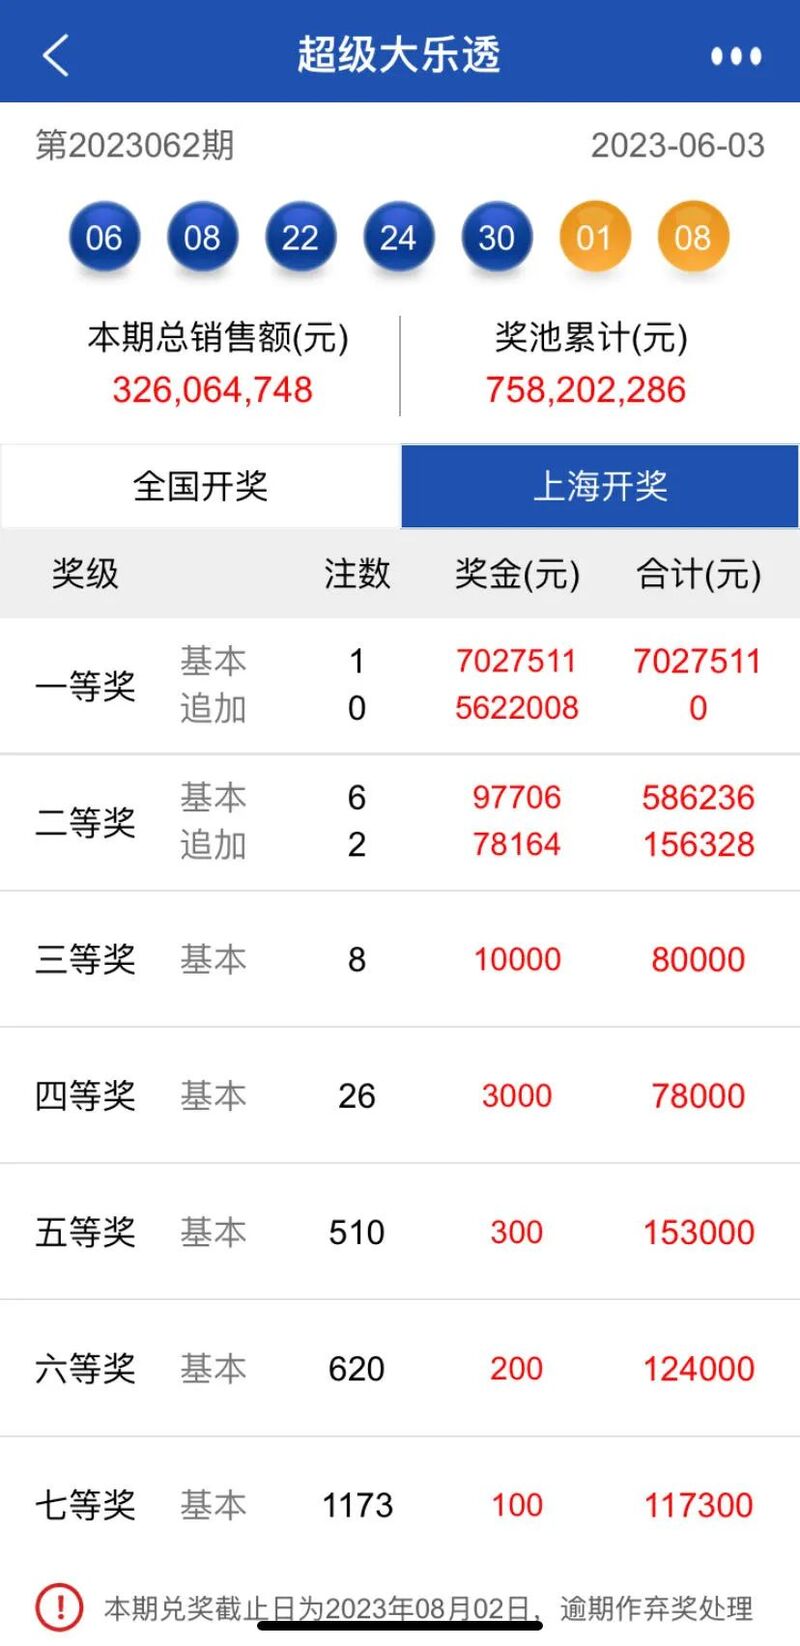 7.16 million yuan! Songjiang lottery buyers win the first prize of the Grand Lotto with a 140 yuan lottery ticket. The country | single bet | lottery ticket